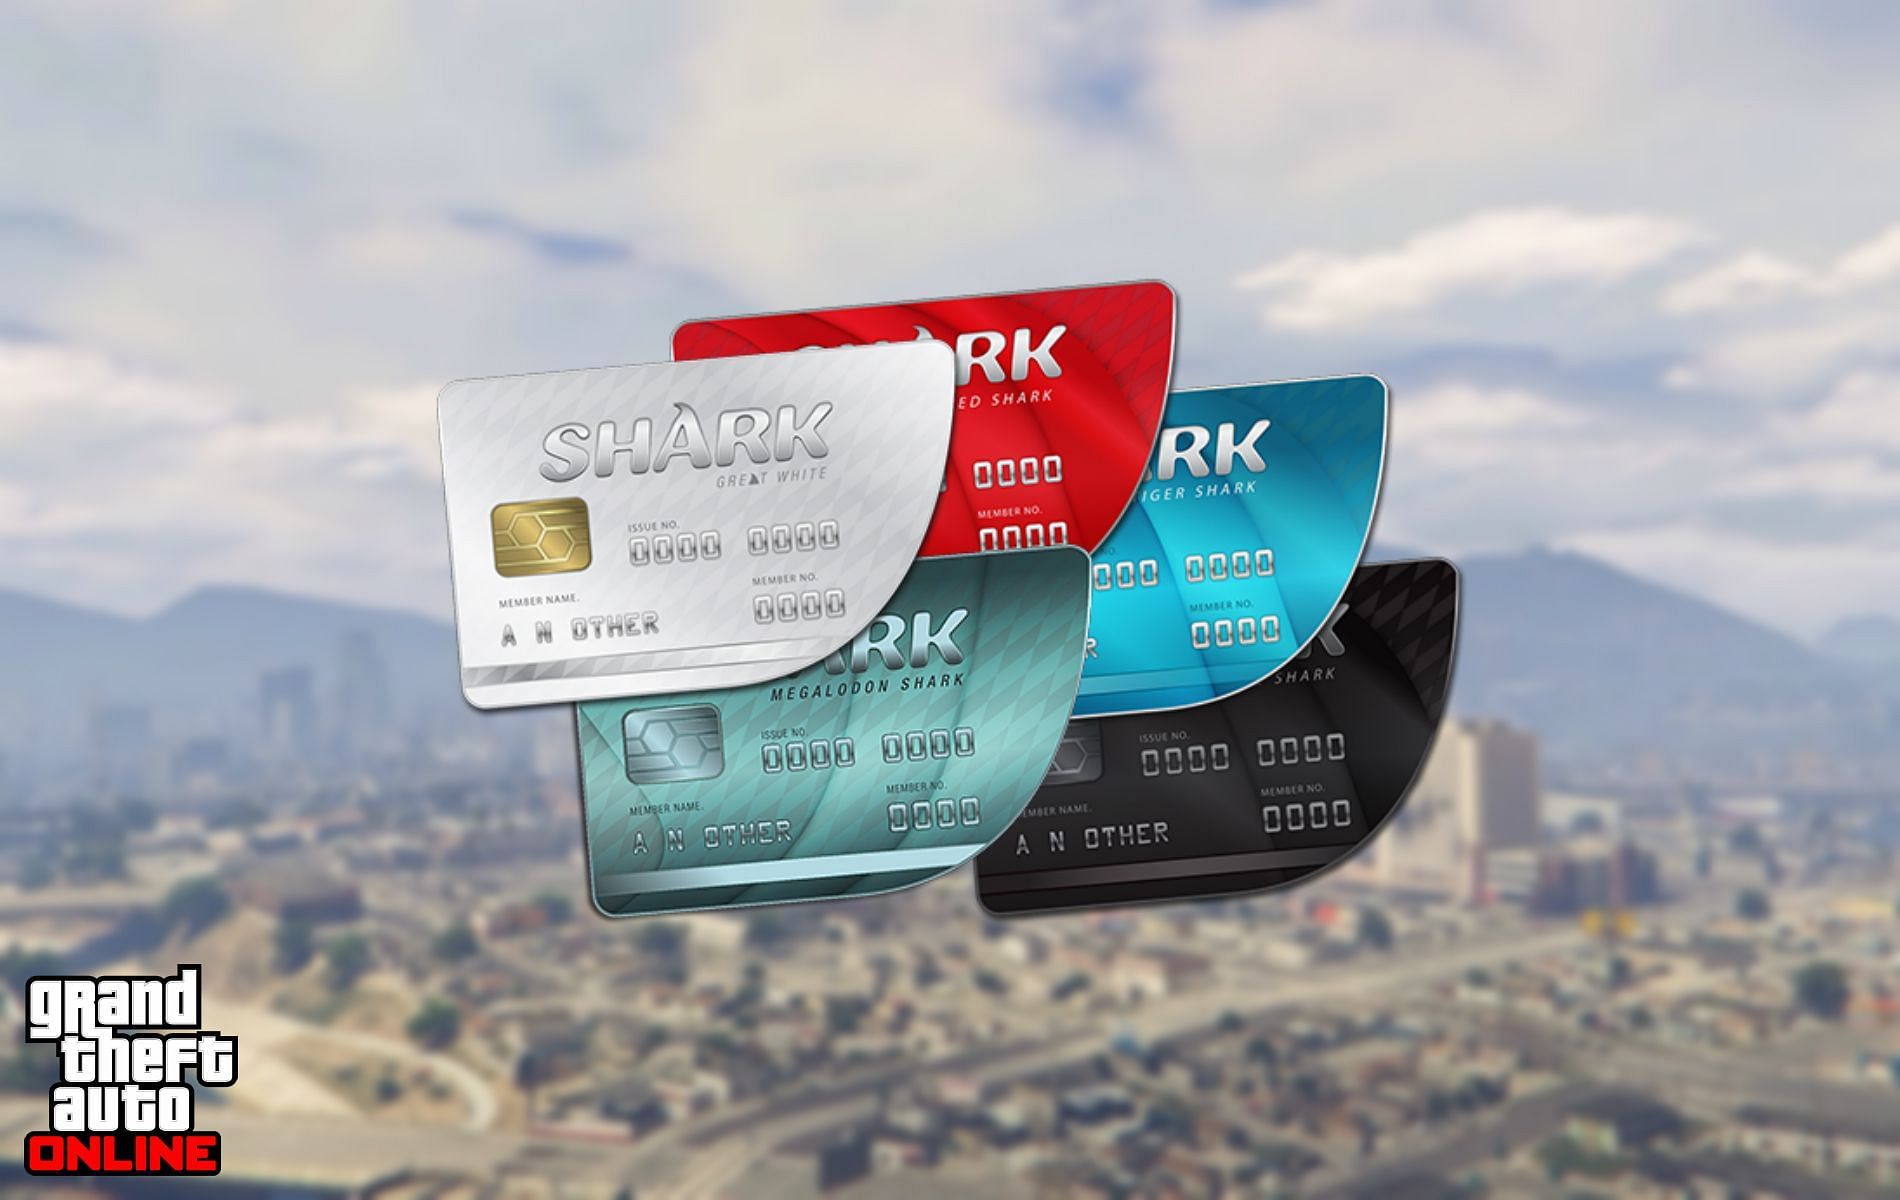 GTA 5 is on sale right now on the Humble Store along with Shark Card packs (Image via Sportskeeda)